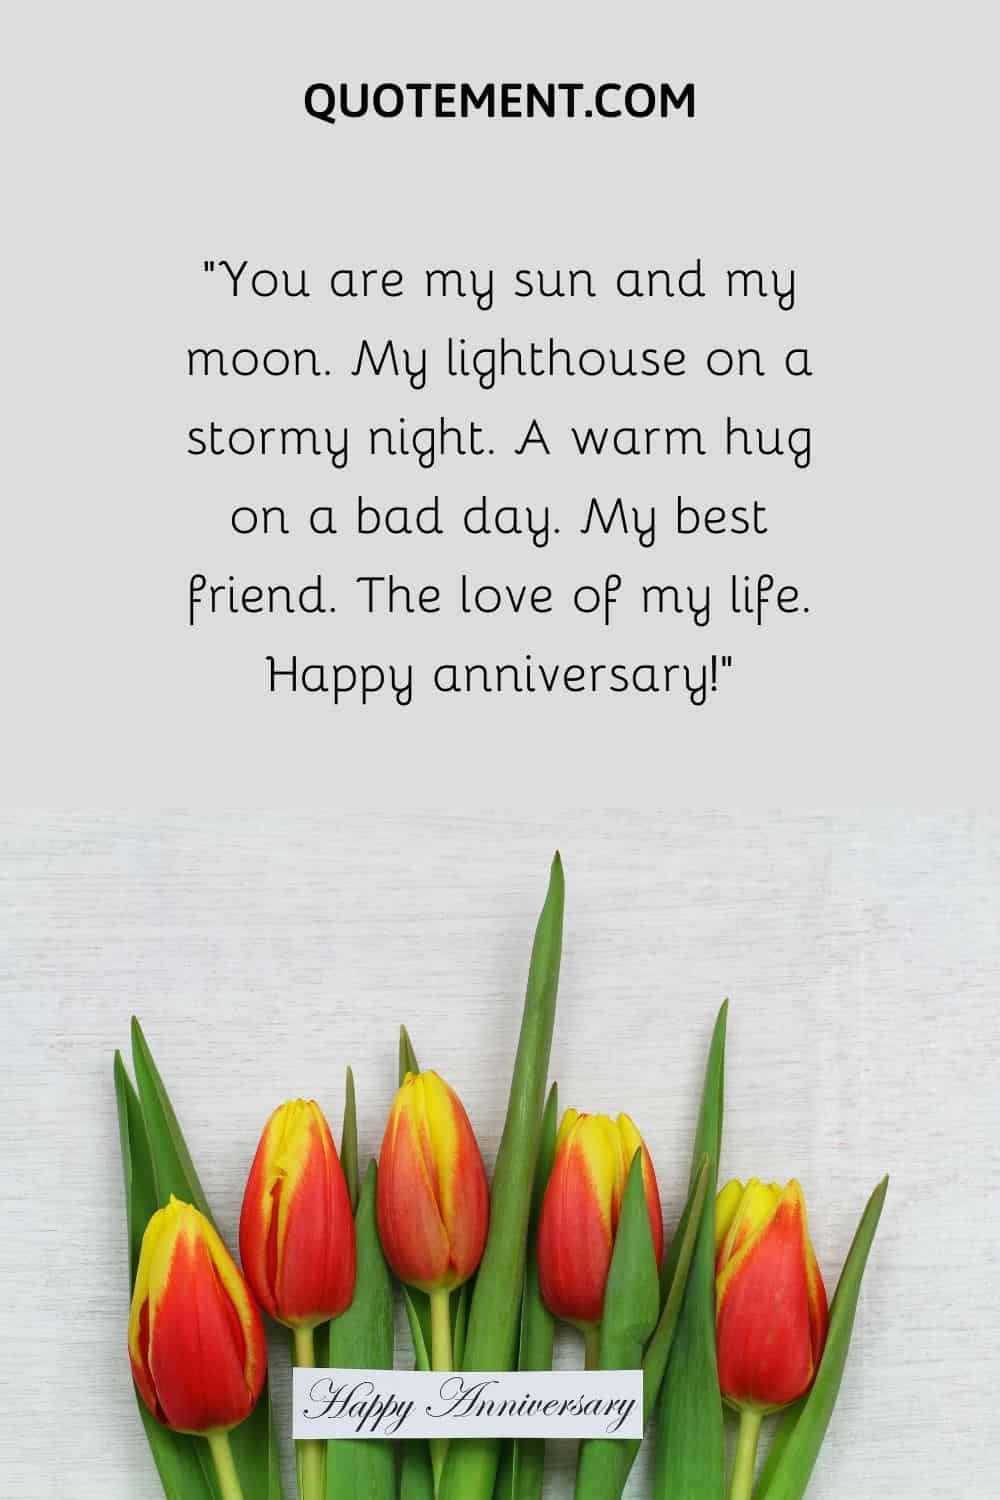 “You are my sun and my moon. My lighthouse on a stormy night. A warm hug on a bad day. My best friend. The love of my life. Happy anniversary!”